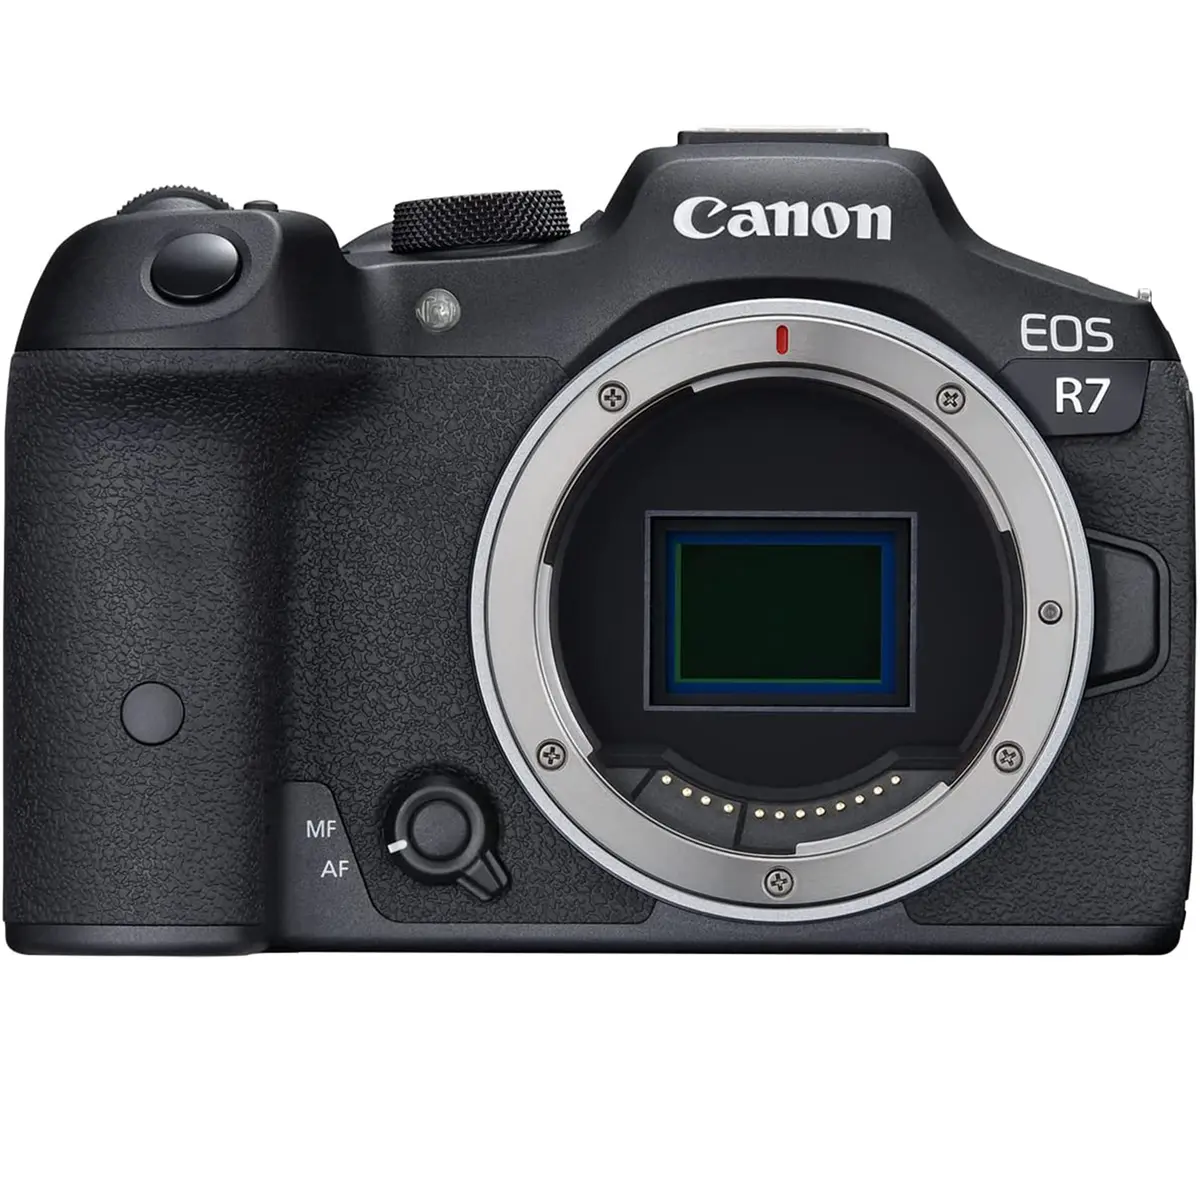 1. Canon EOS R7 Body (with adapter)